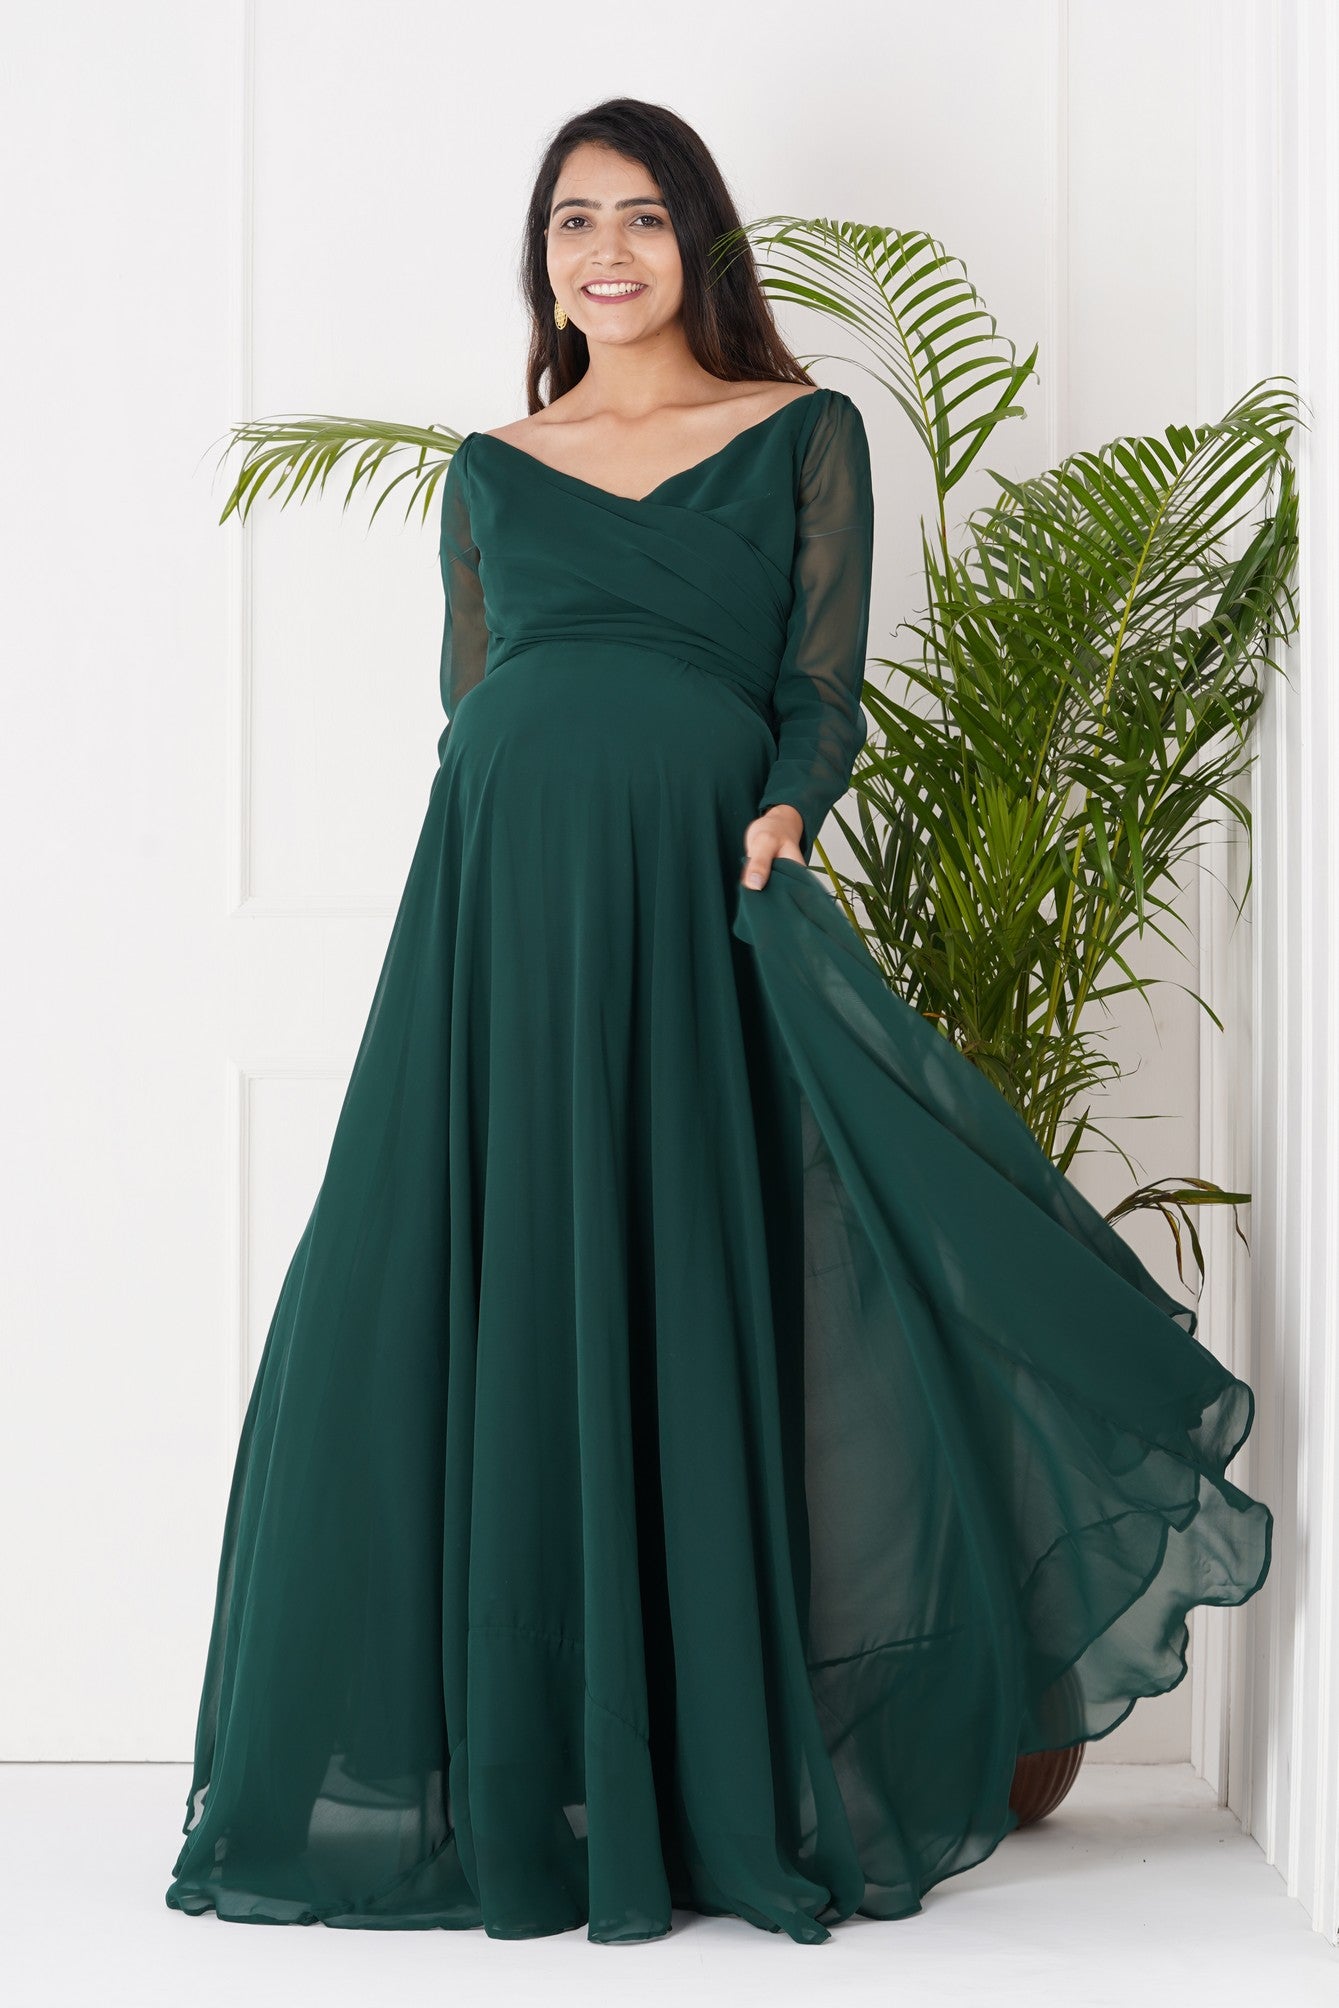  Green Maternity Photoshoot Gown